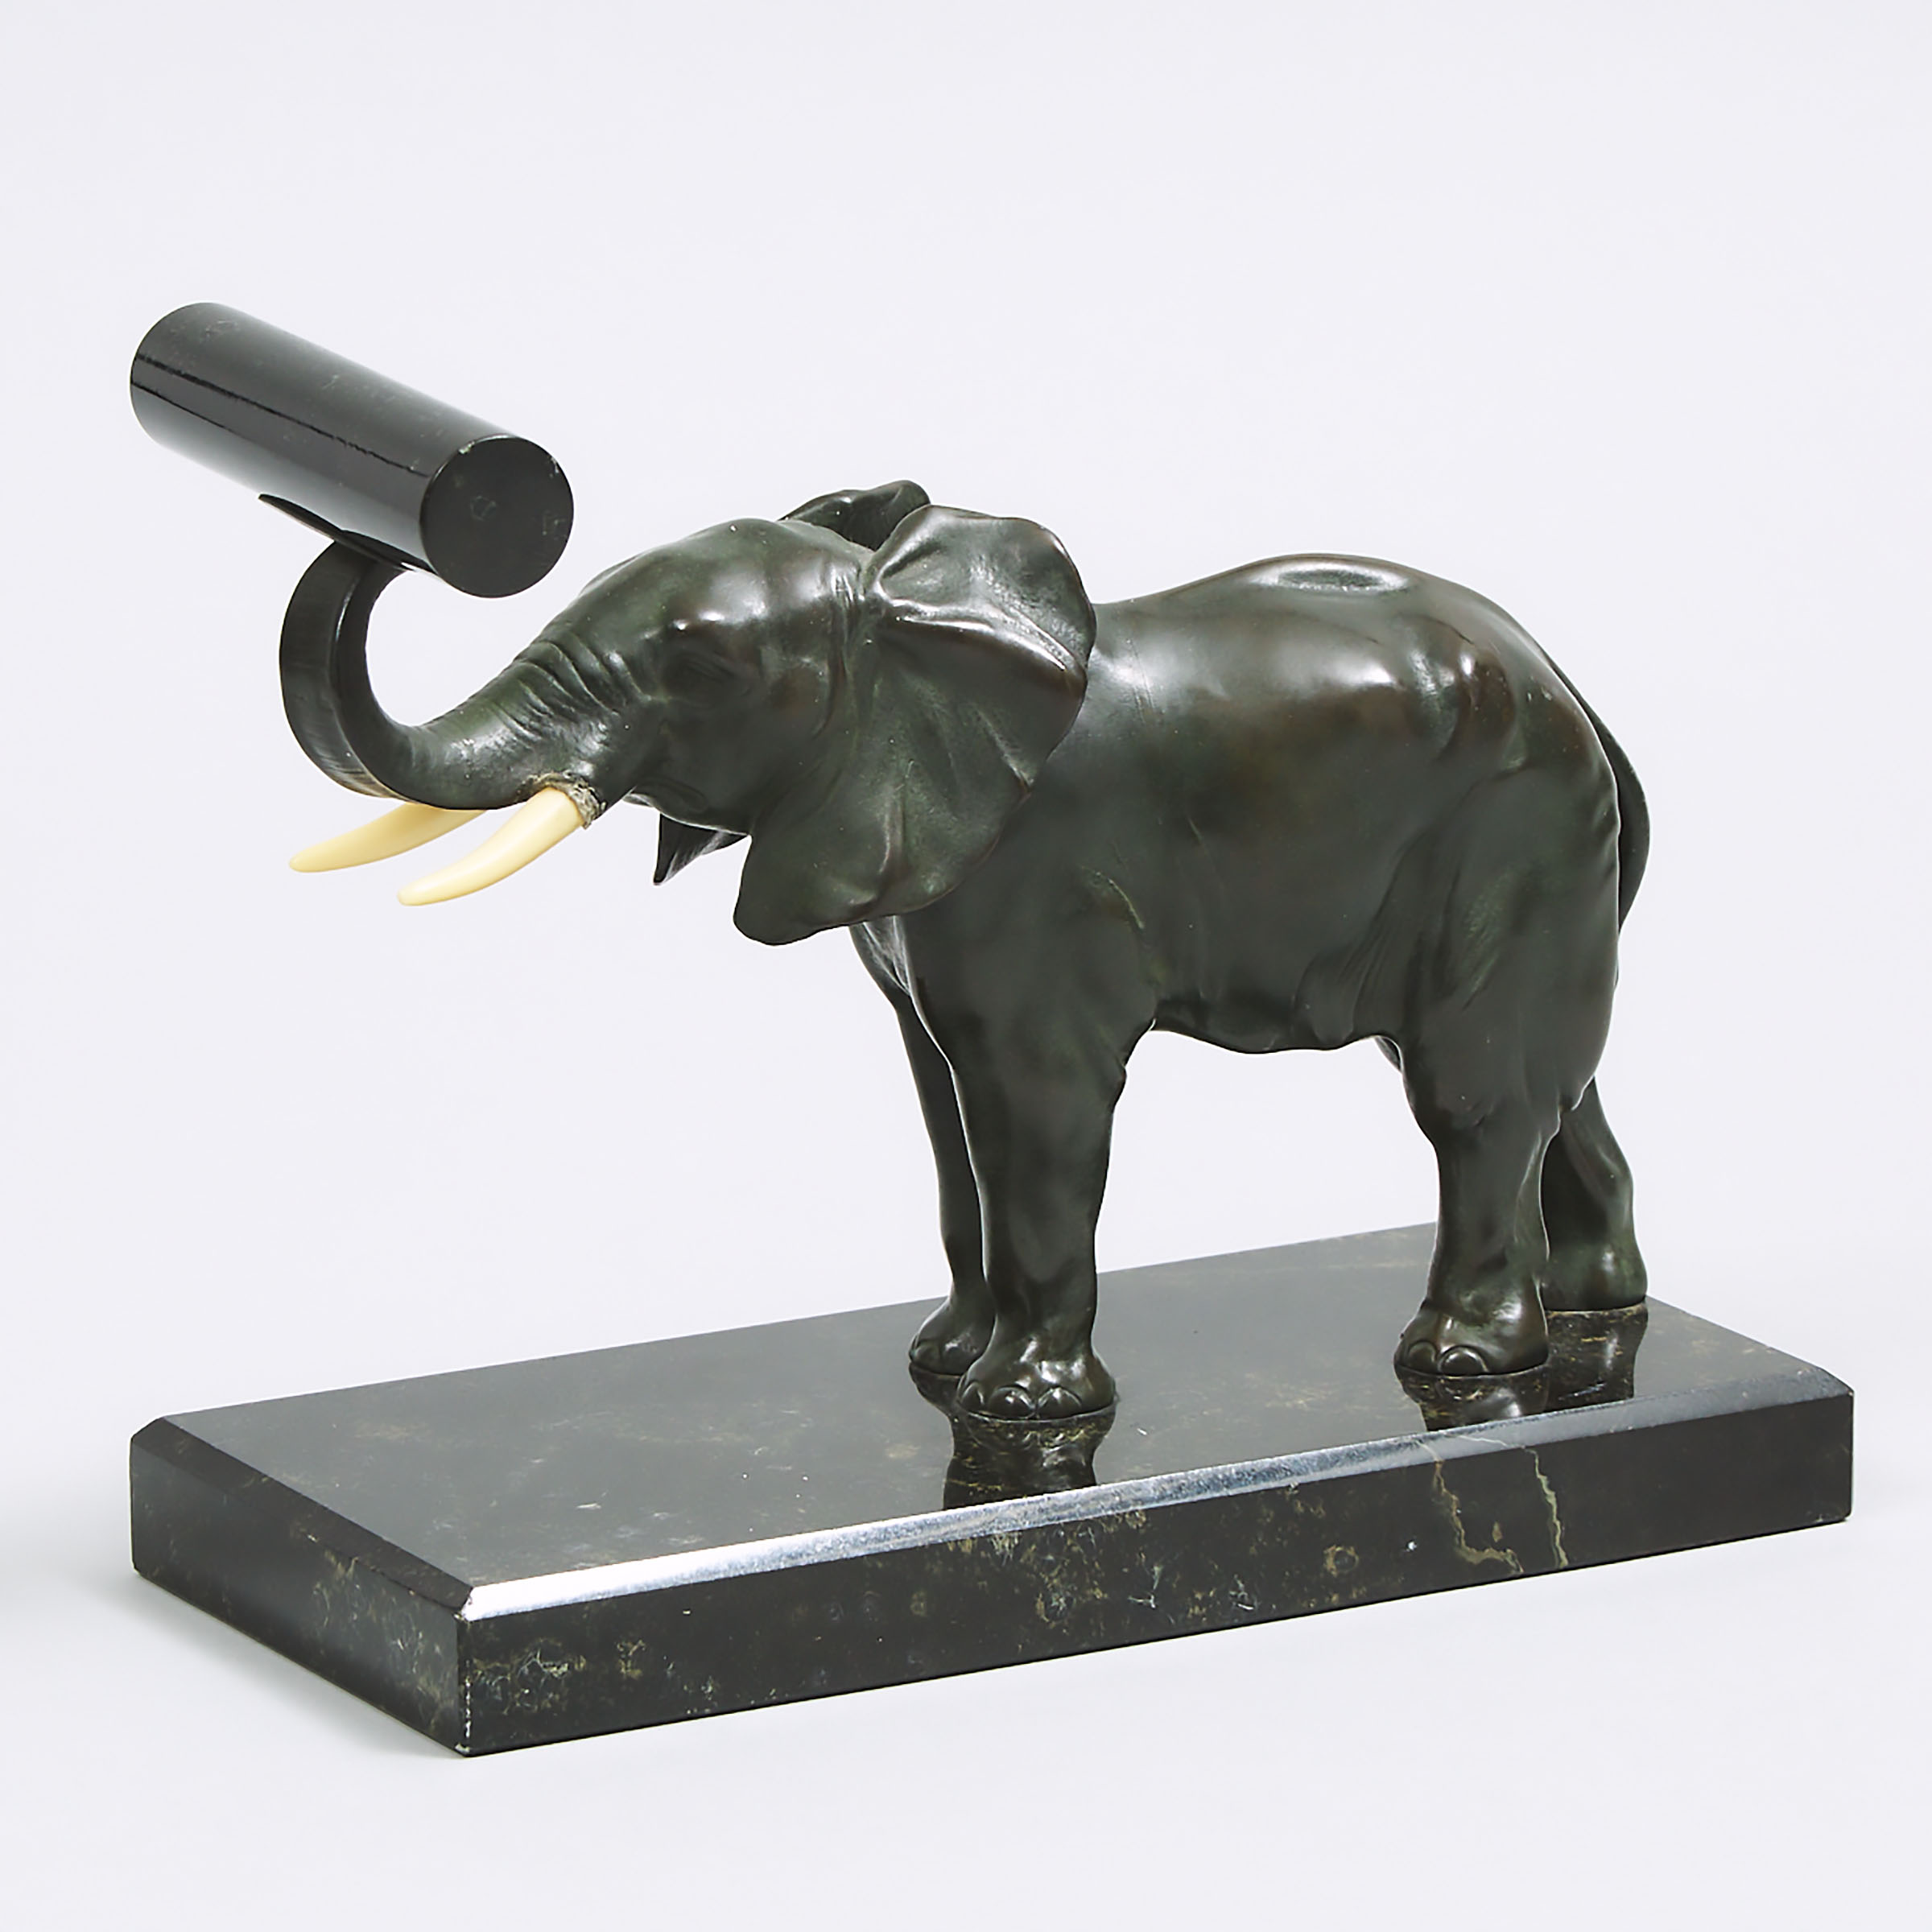 French School Elephant Form Bookend, early-mid 20t century